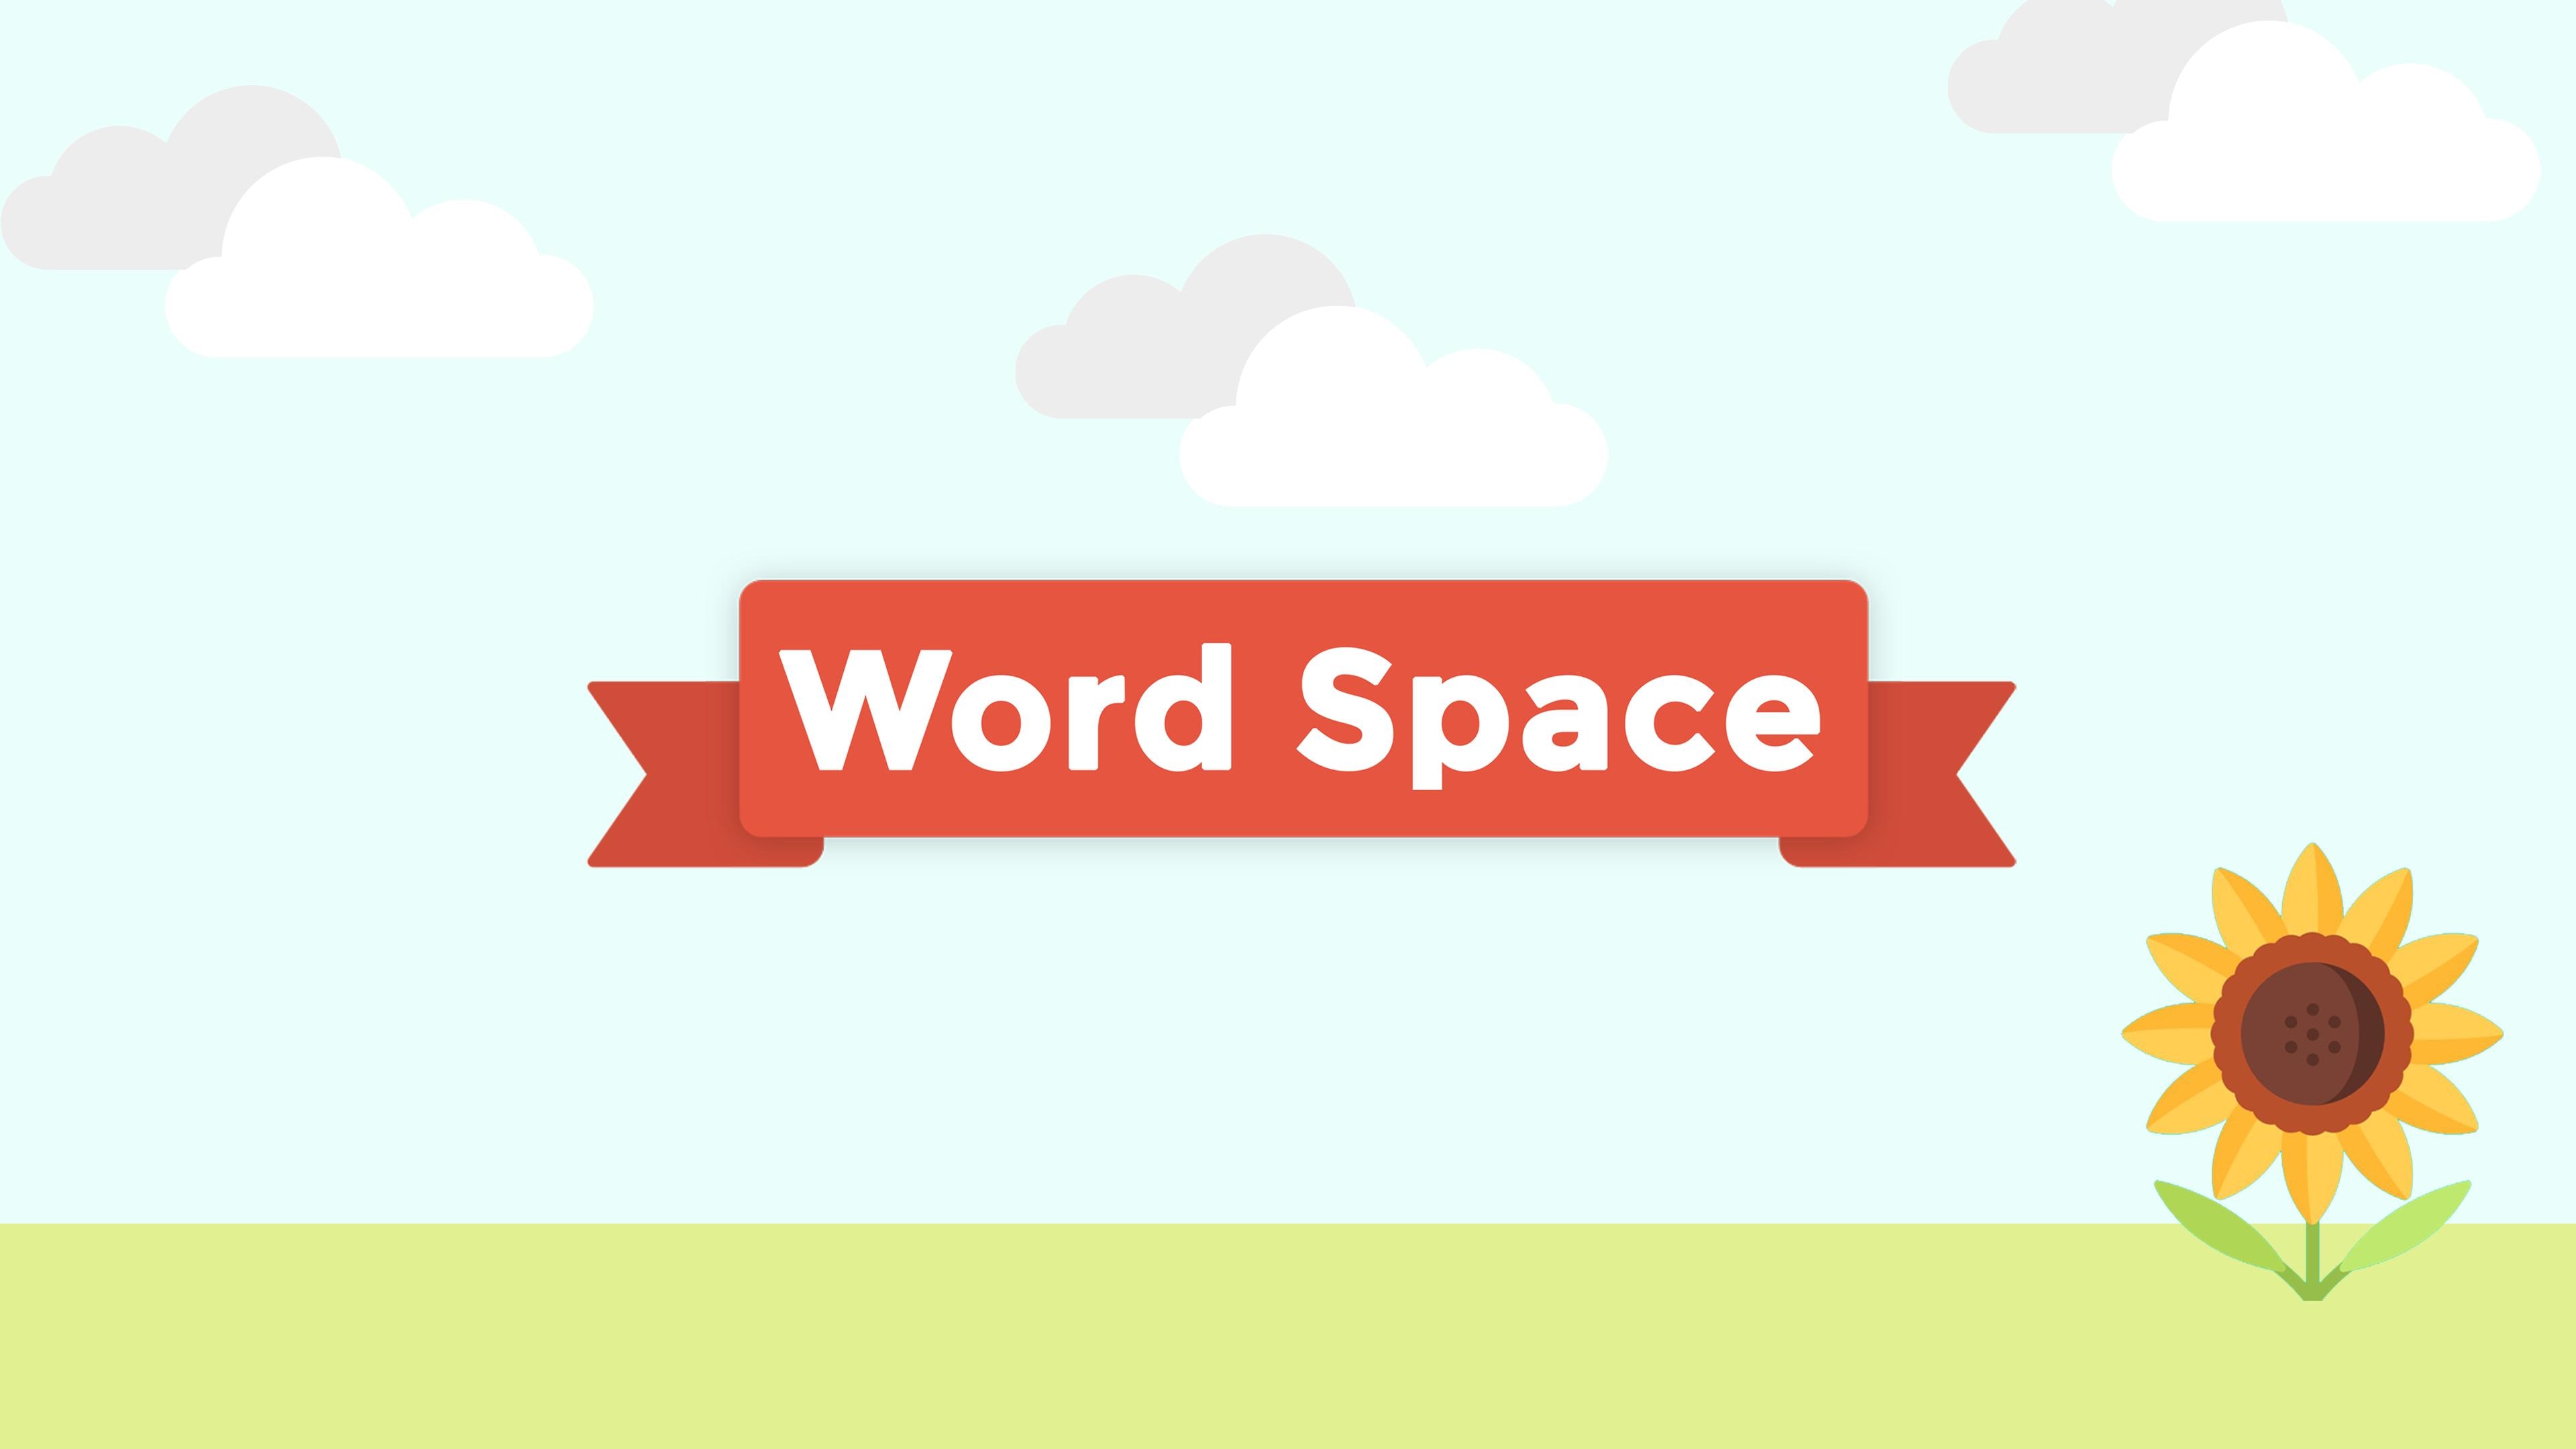 Word Space (영어)